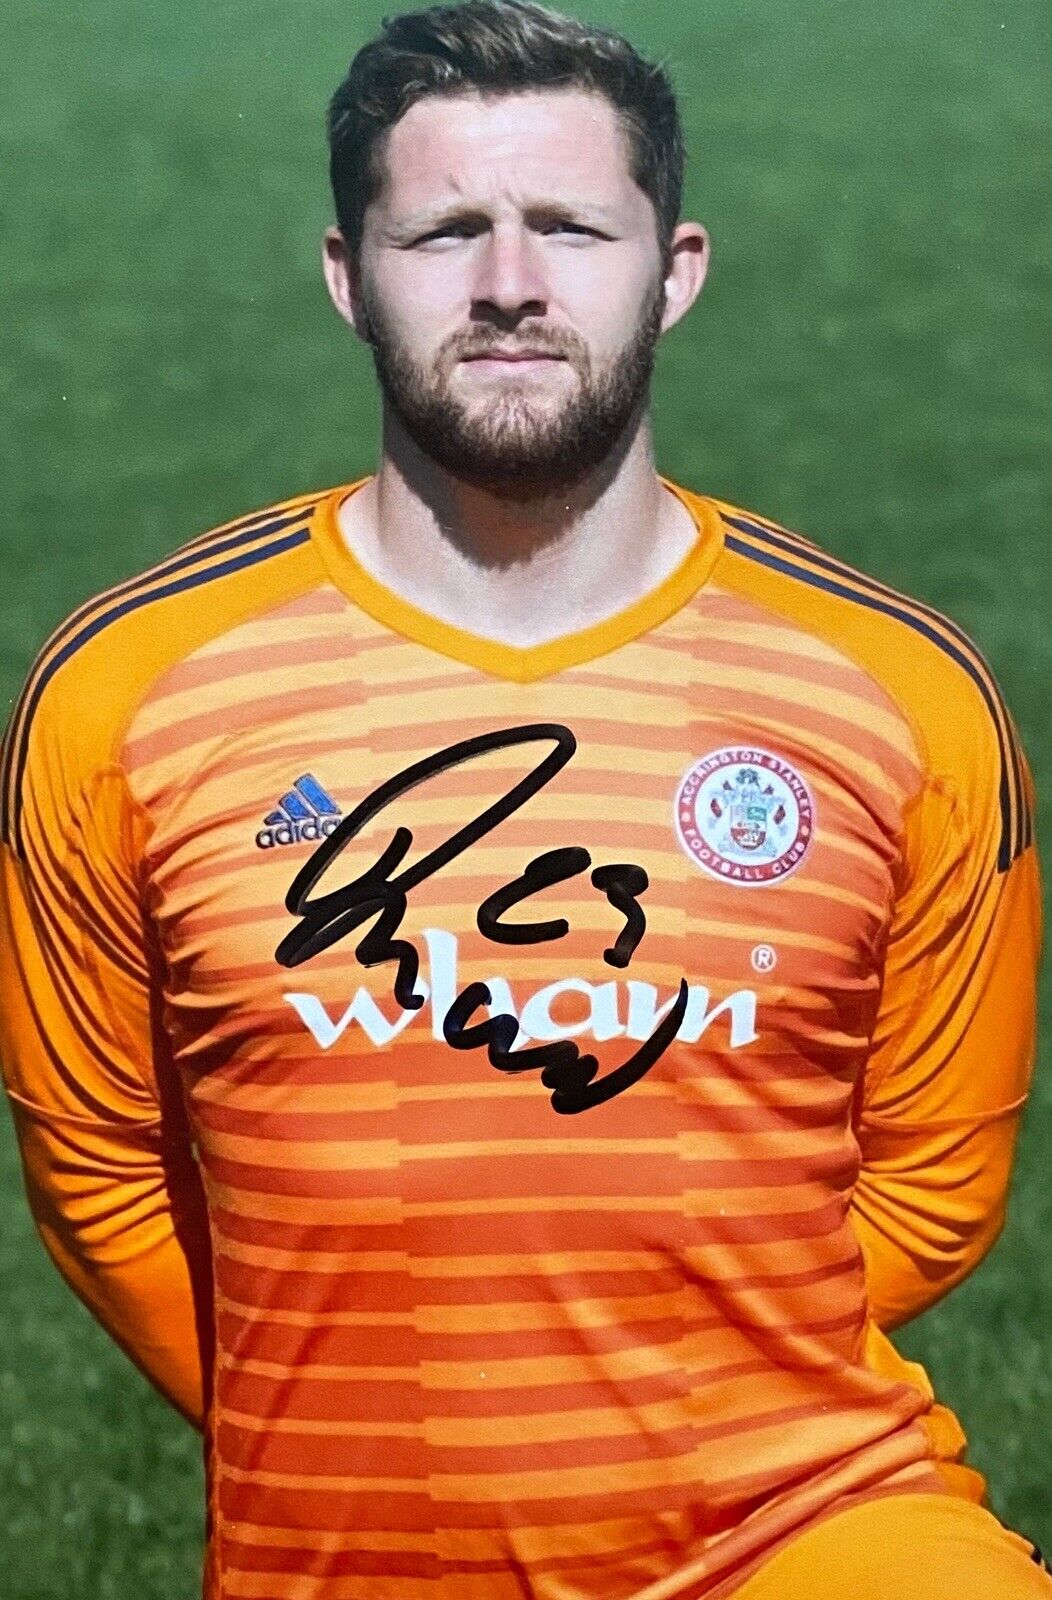 Jonny Maxted Genuine Hand Signed 6X4 Photo Poster painting - Accrington Stanley